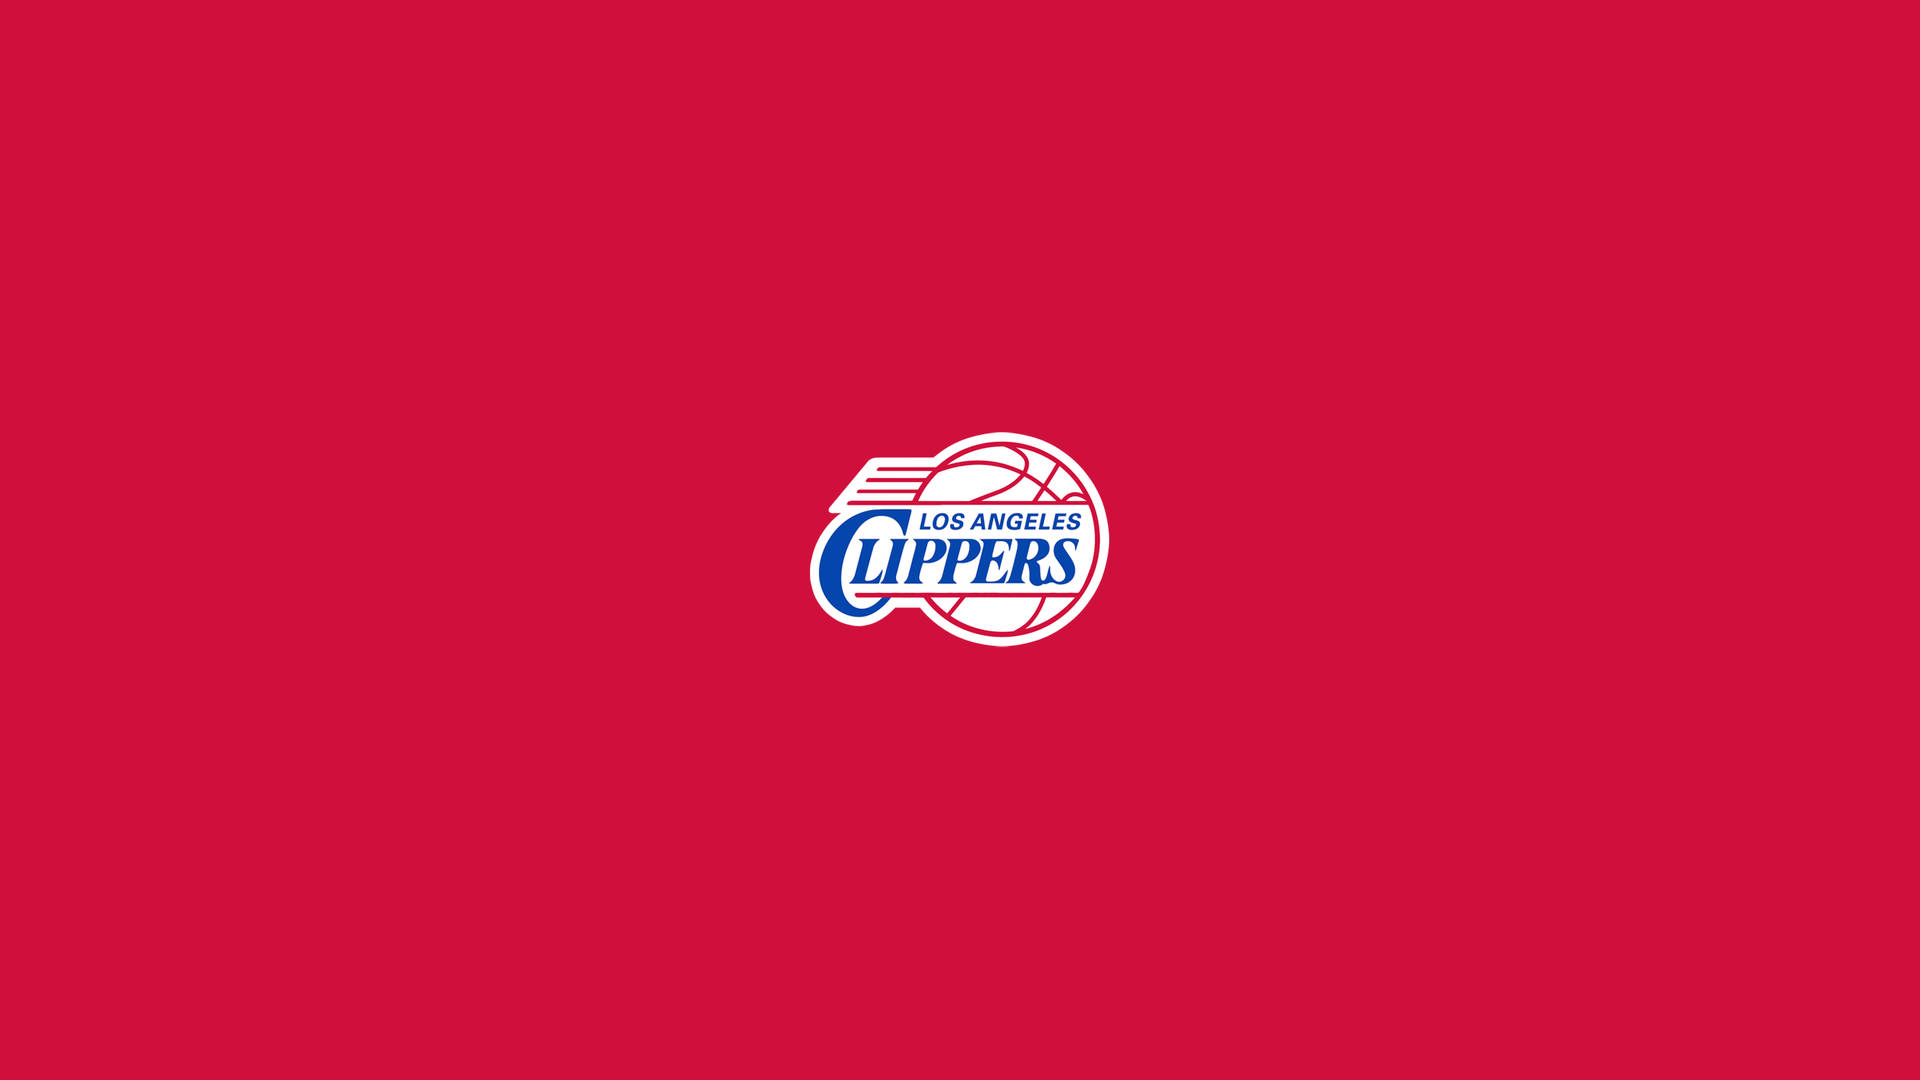 Los Angeles Clippers 2010 Logo Background